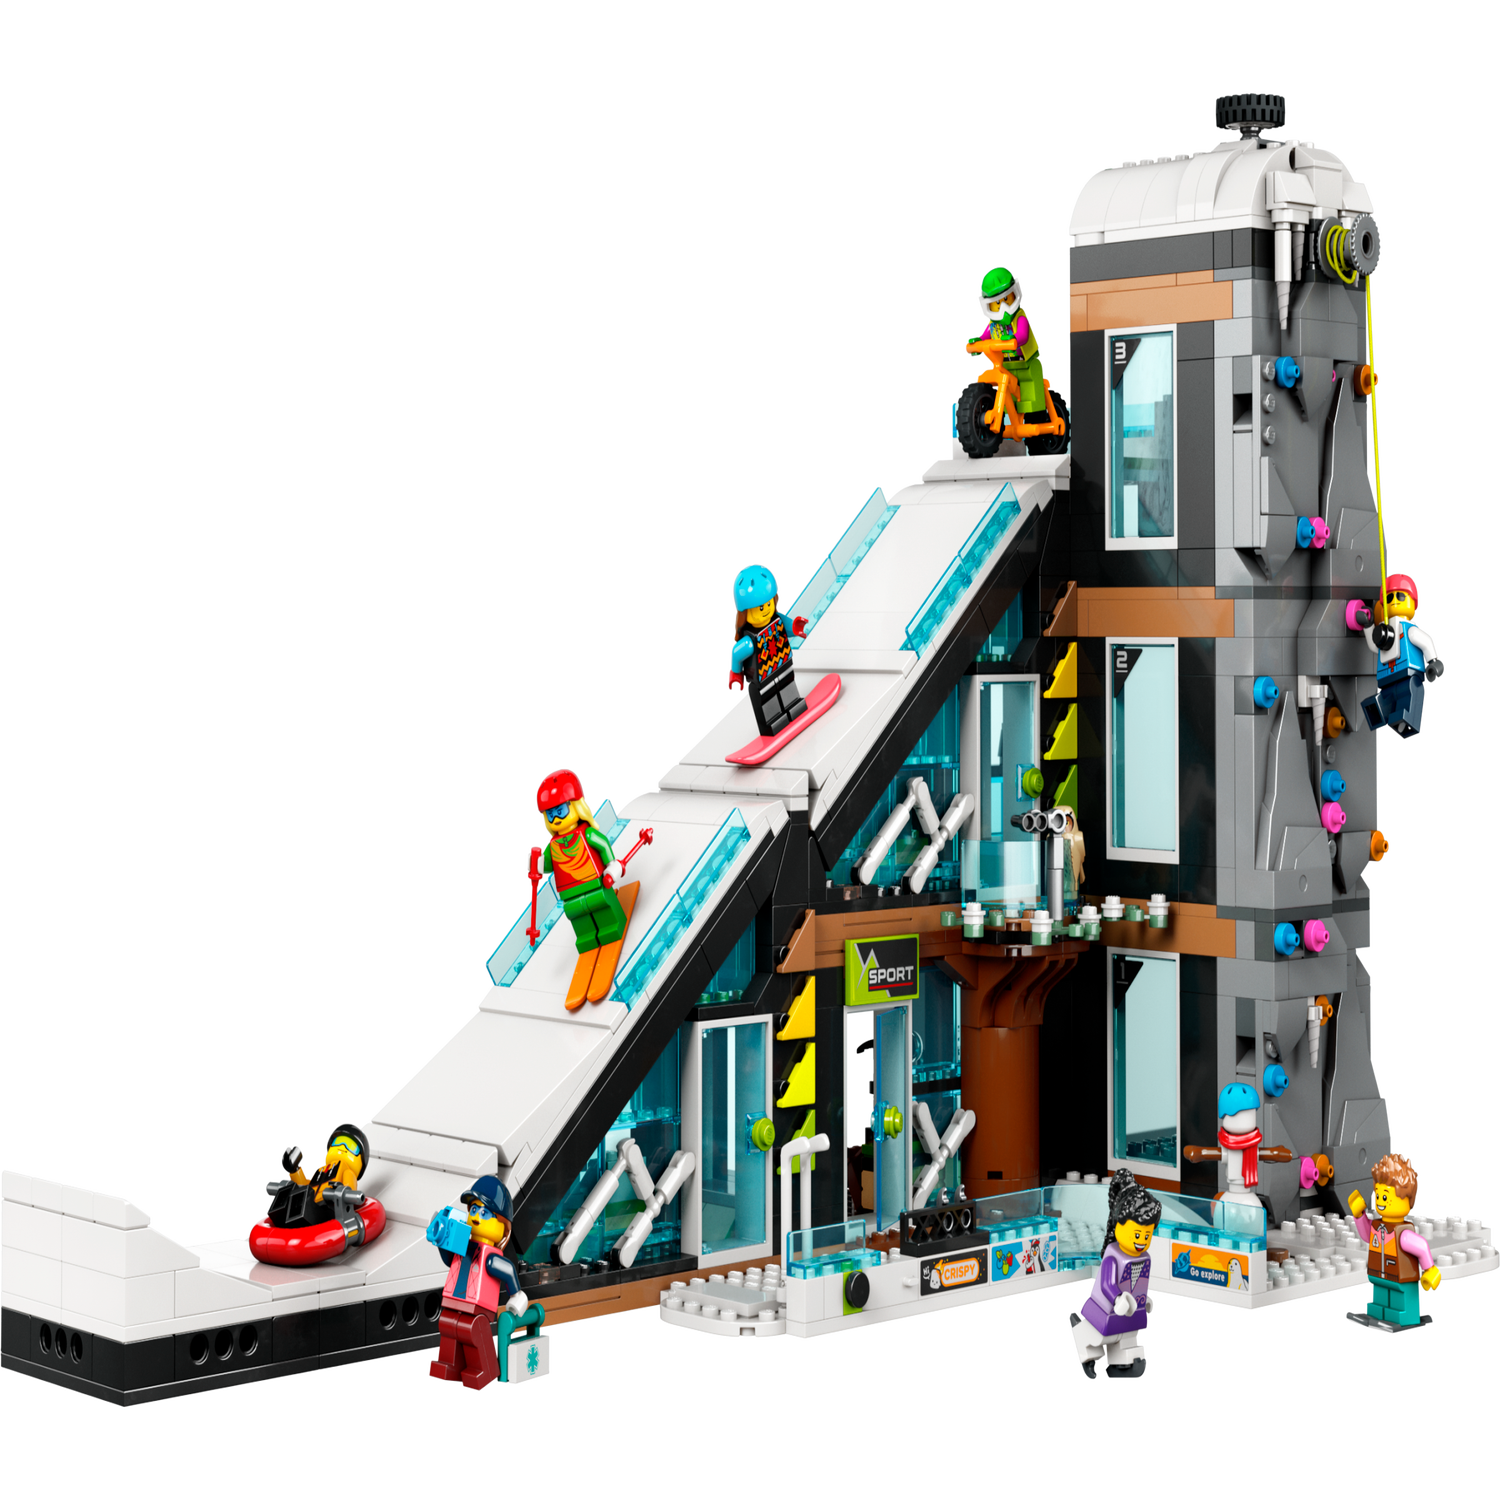 Ski and Climbing Center 60366 | City | Buy online at the Official LEGO ...